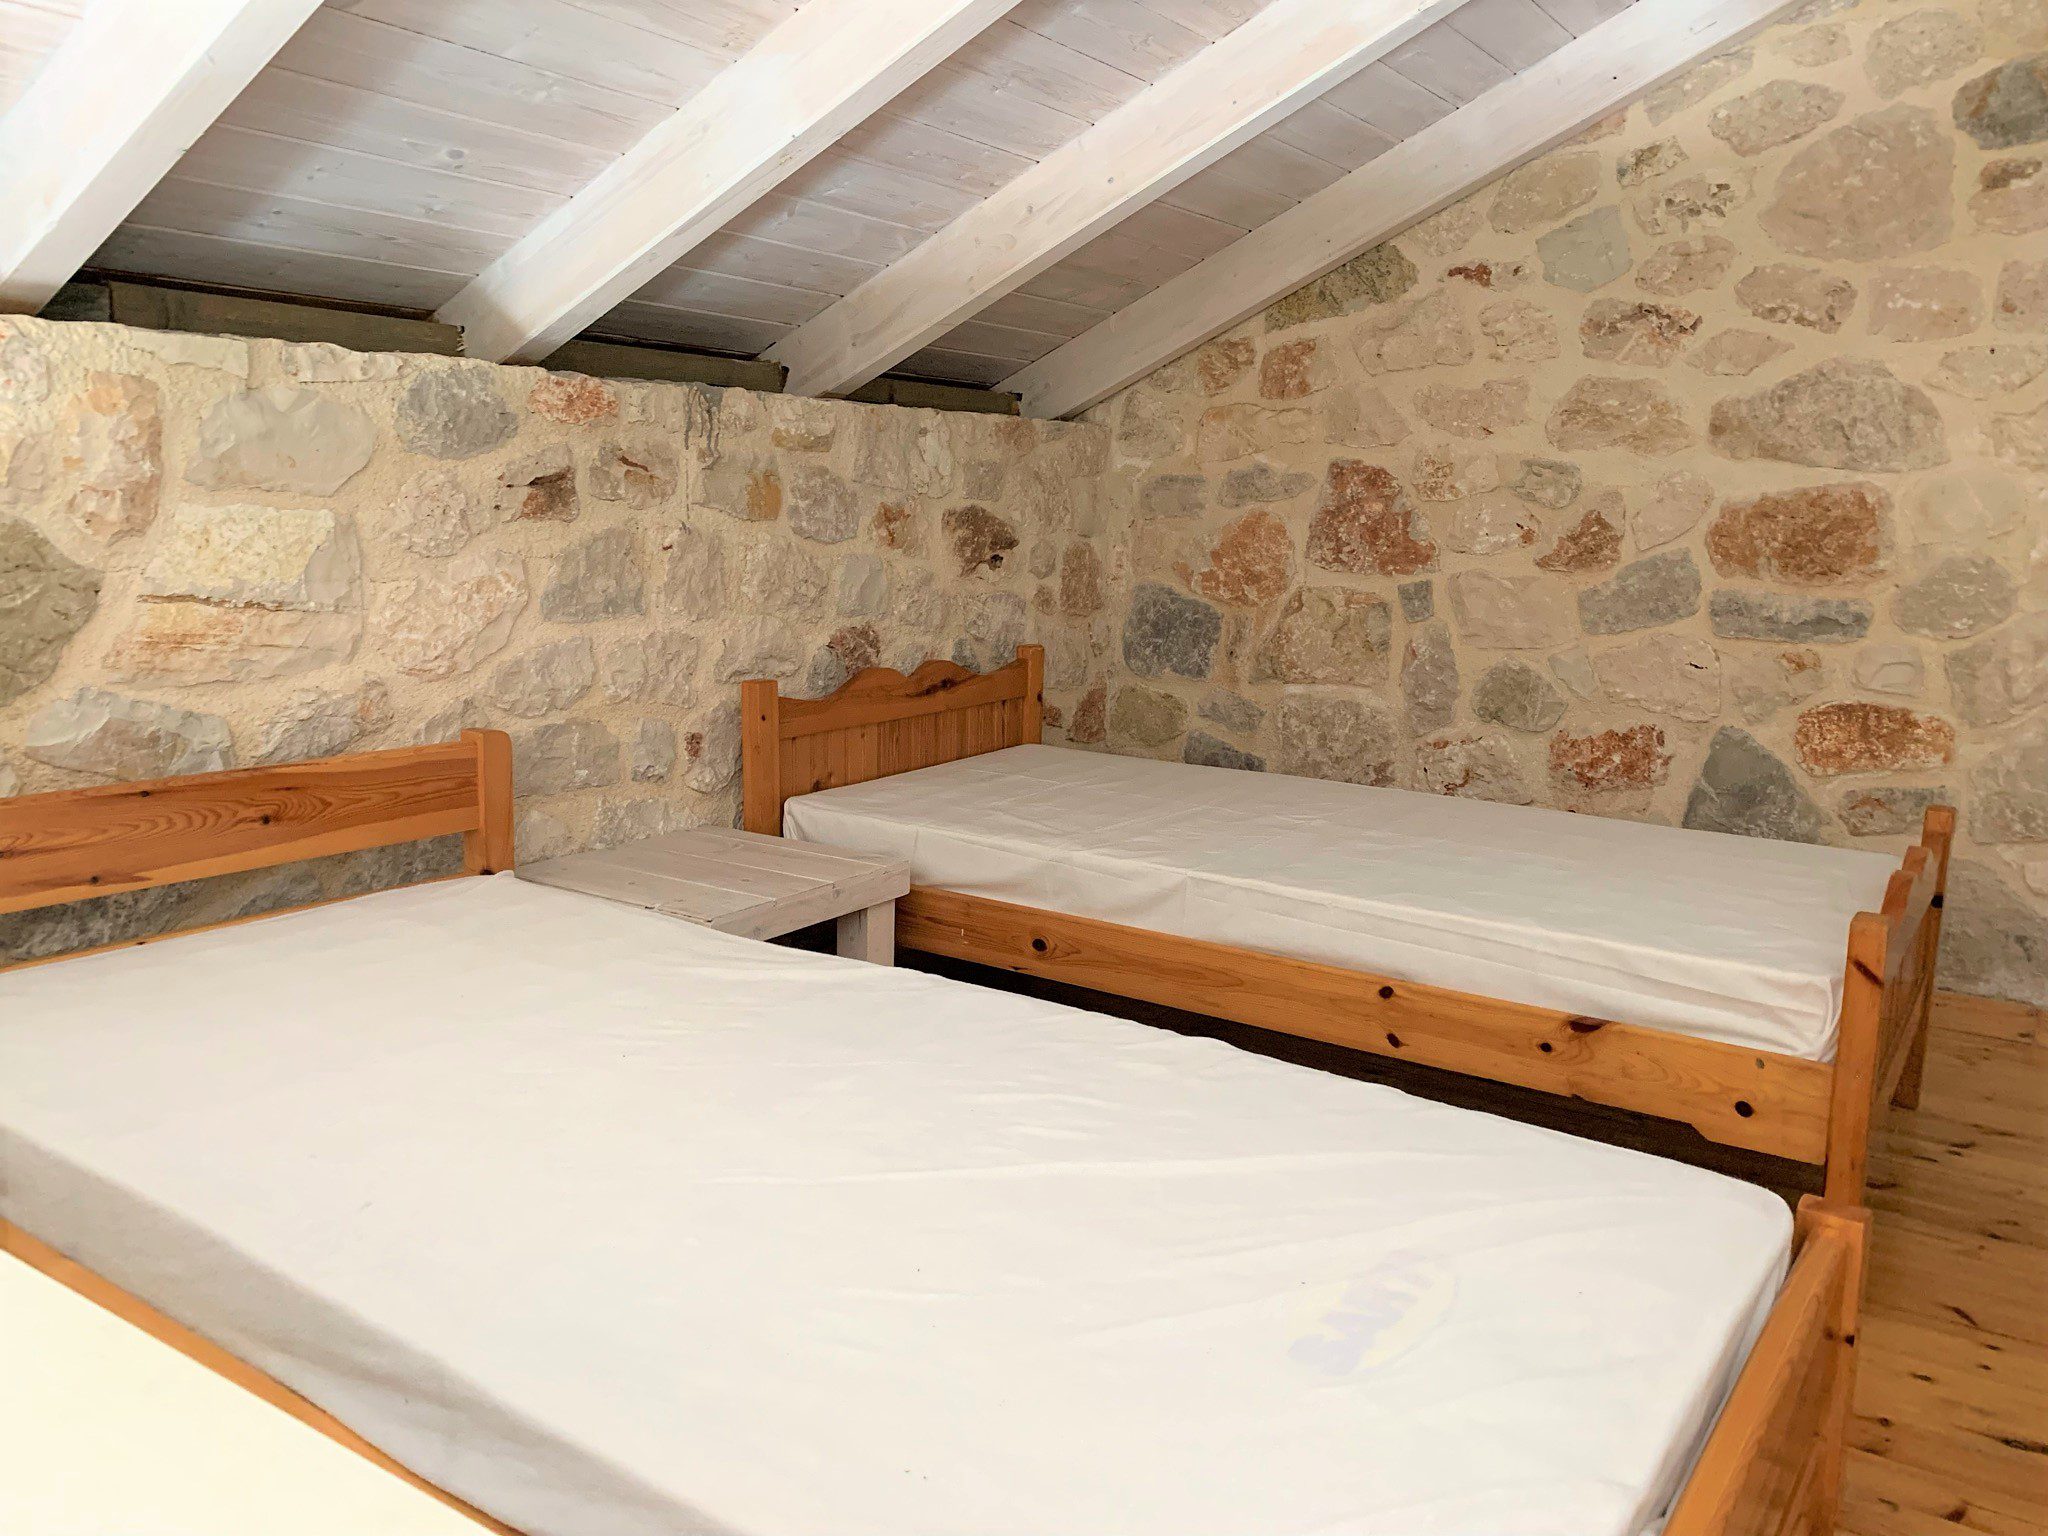 Attic bedroom of holiday houses for rent on Ithaca Greece, Stavros